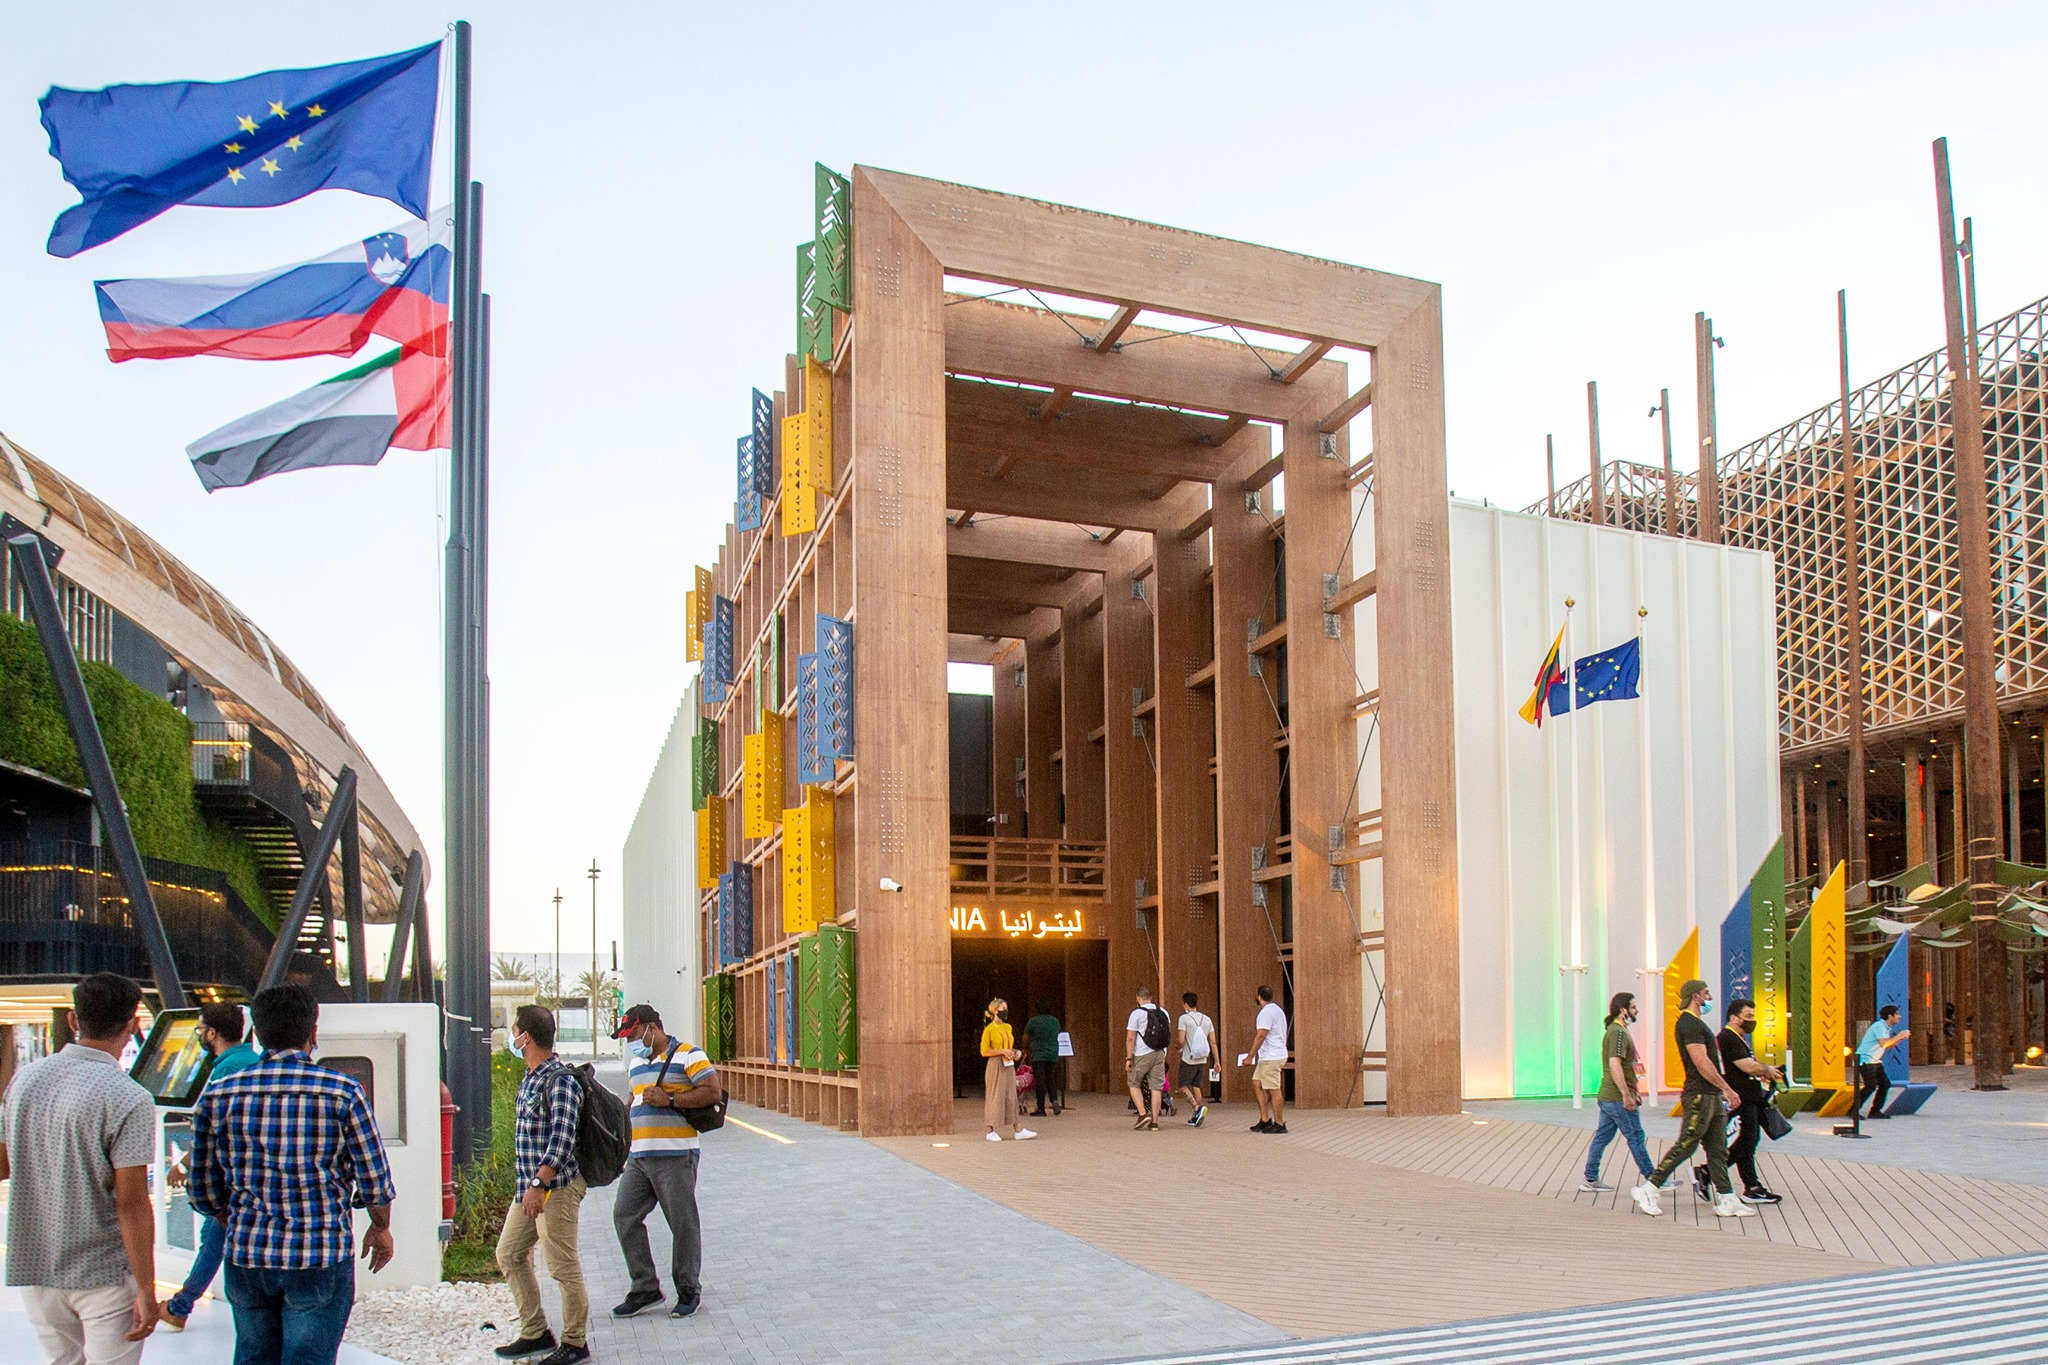 LITHUANIA PAVILION AT EXPO 2020